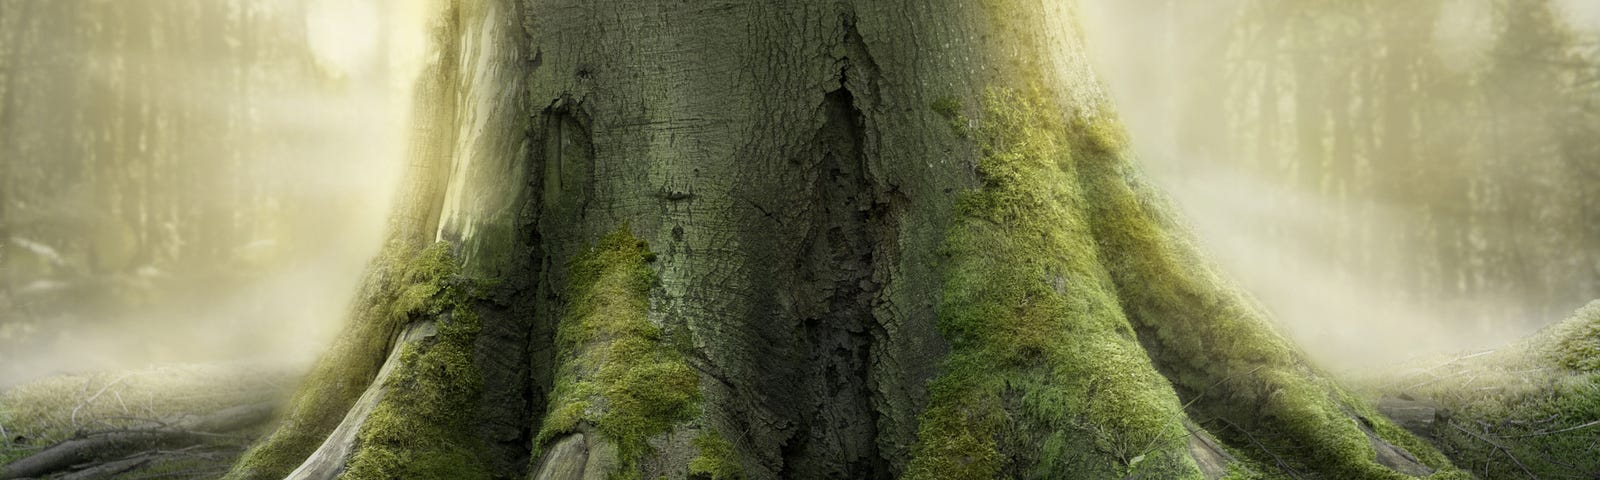 A mossy massive tree trunk with rambling roots reaching out into the forest.